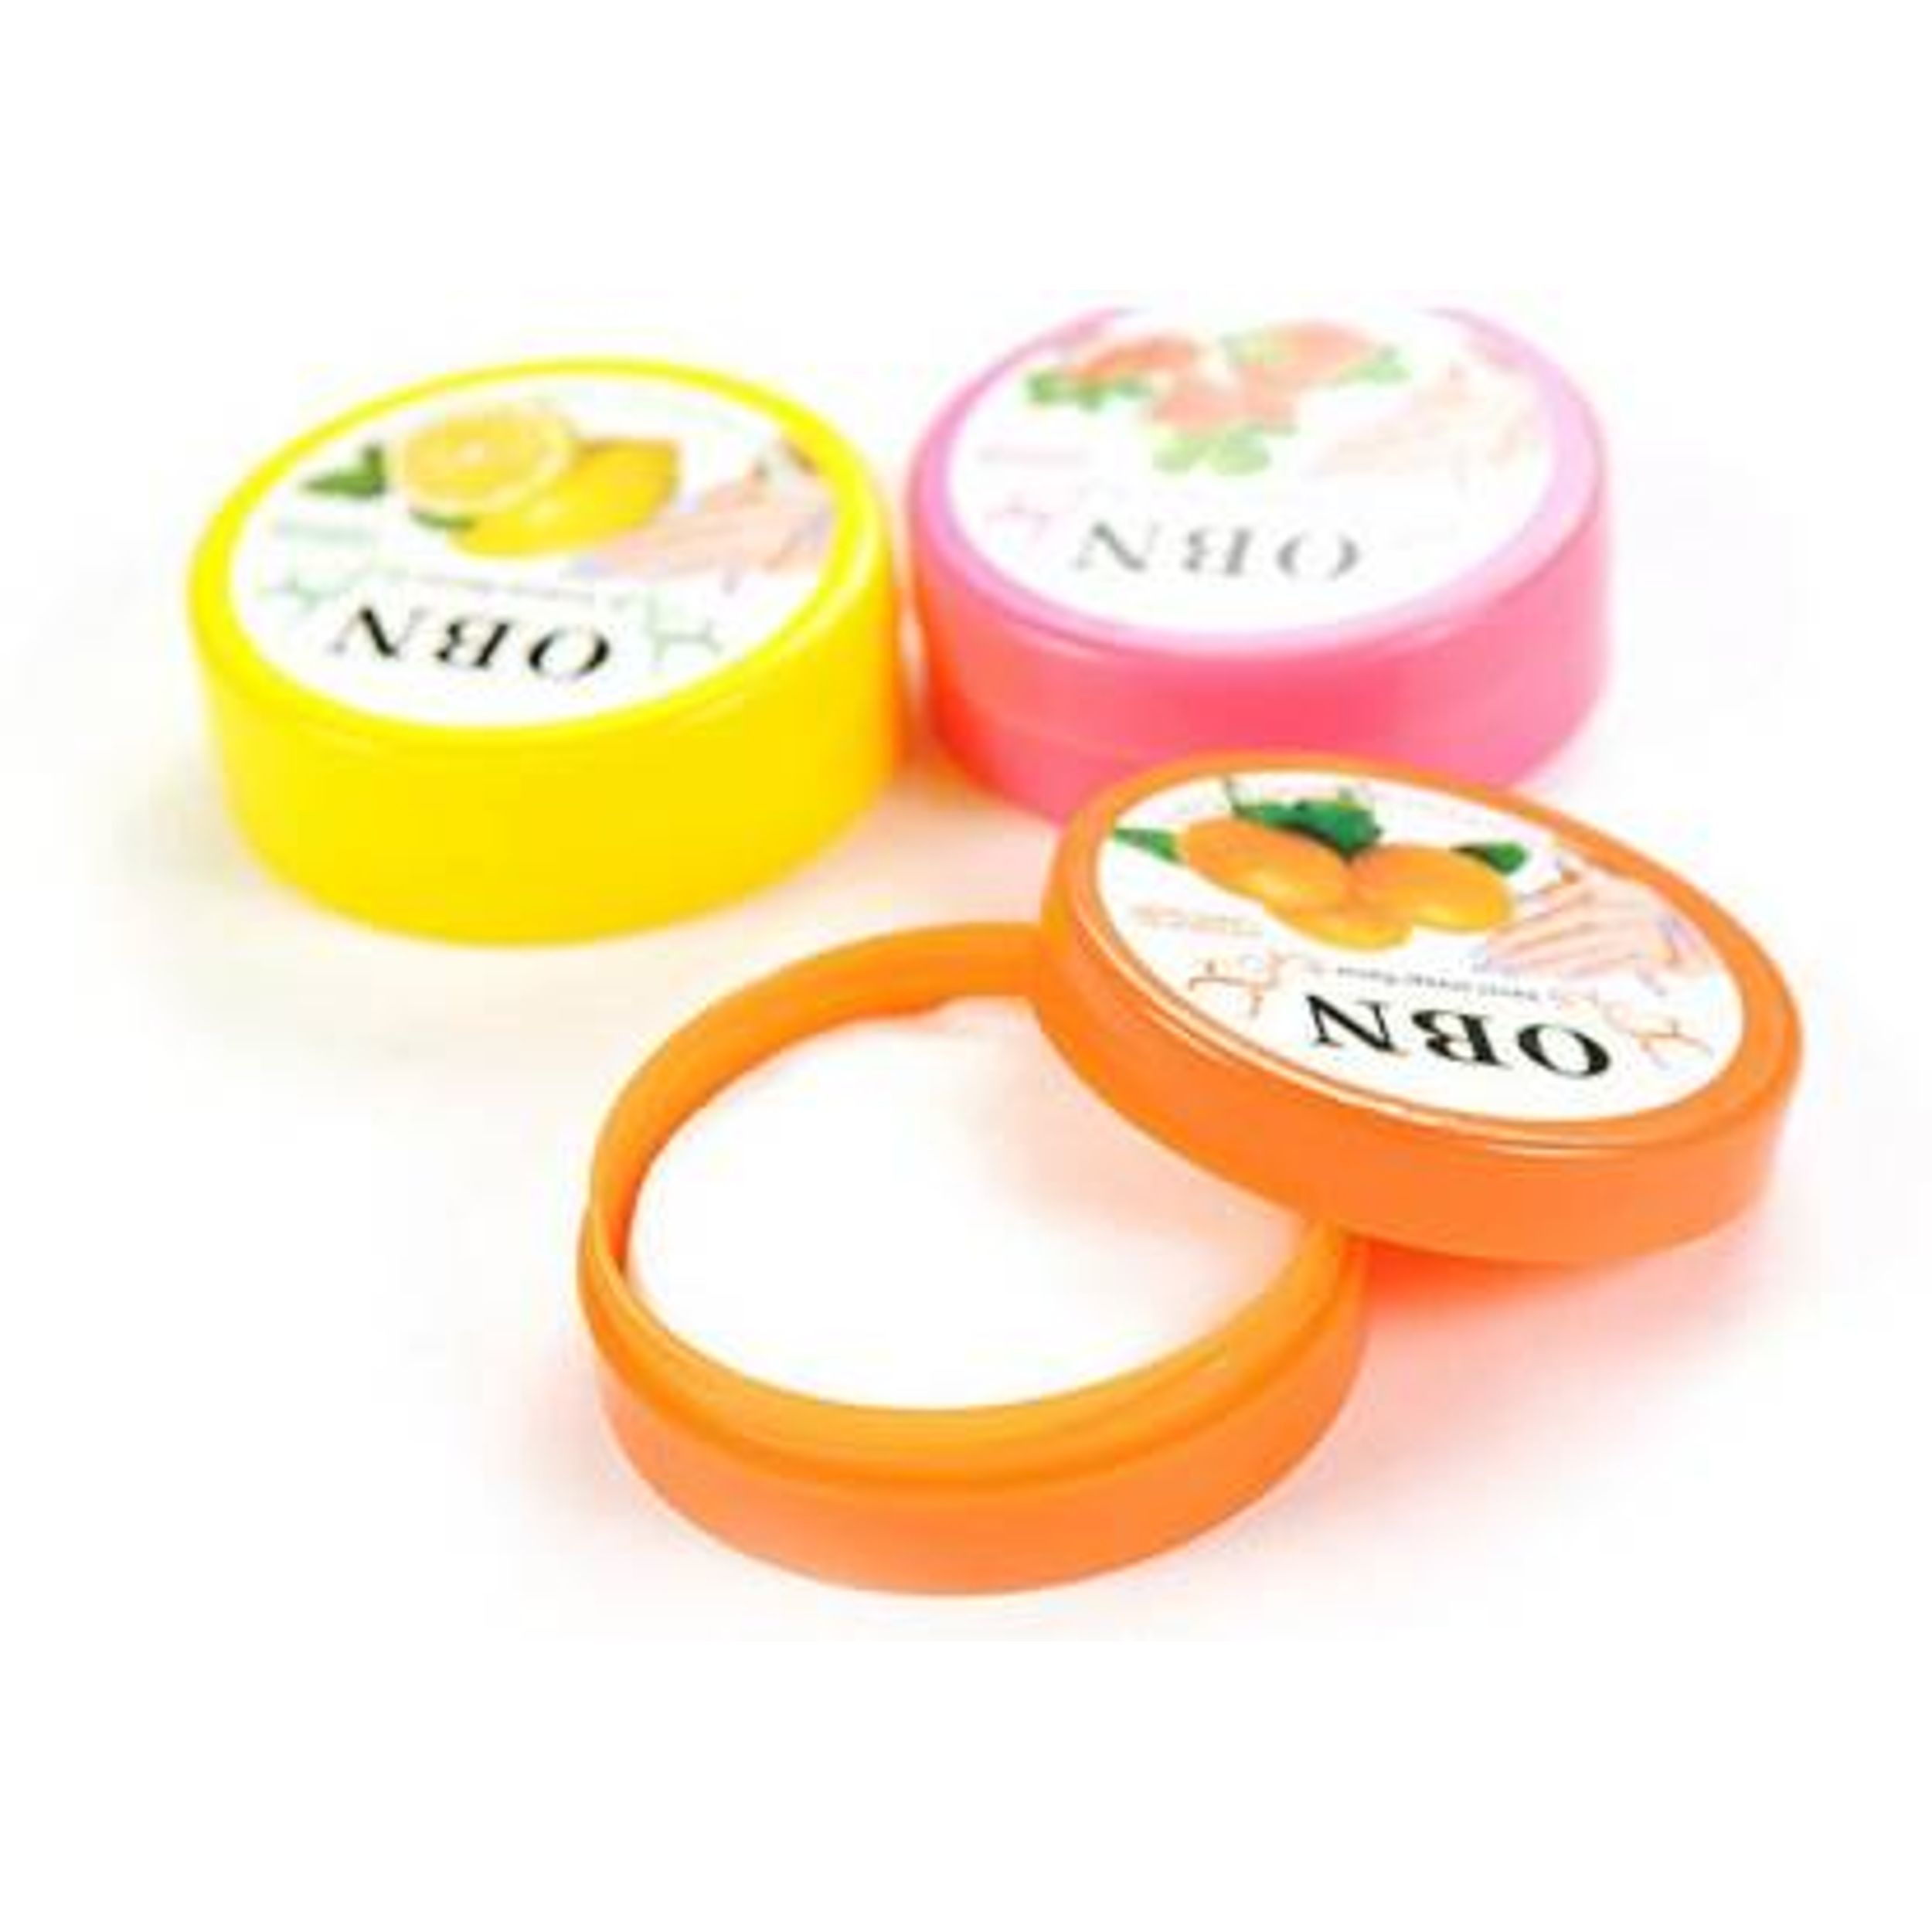 OBN Nail Polish Remover Pads Manicure Tissue Wipes Fruits Scents 25pcs  一次性水果味卸指甲巾 EZ | Lazada